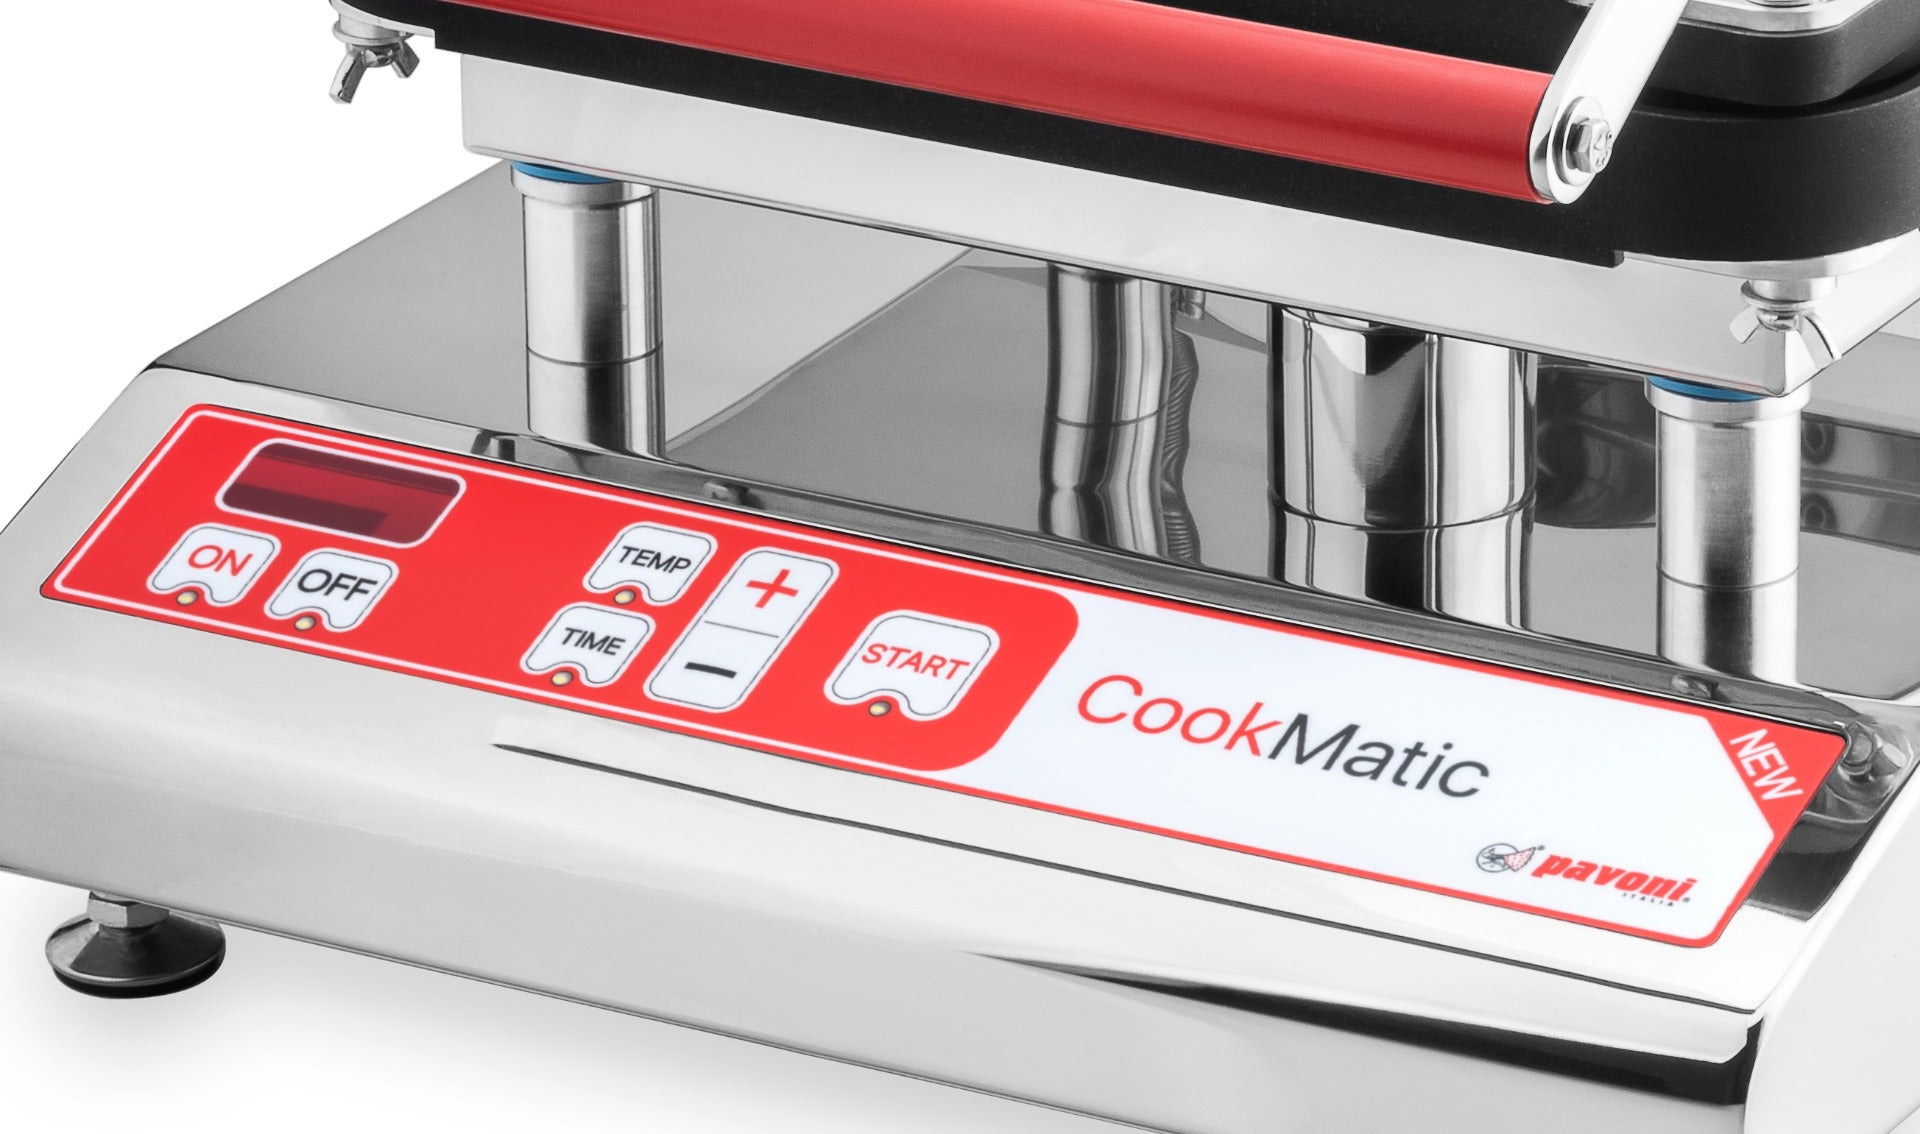 NEW COOKMATIC